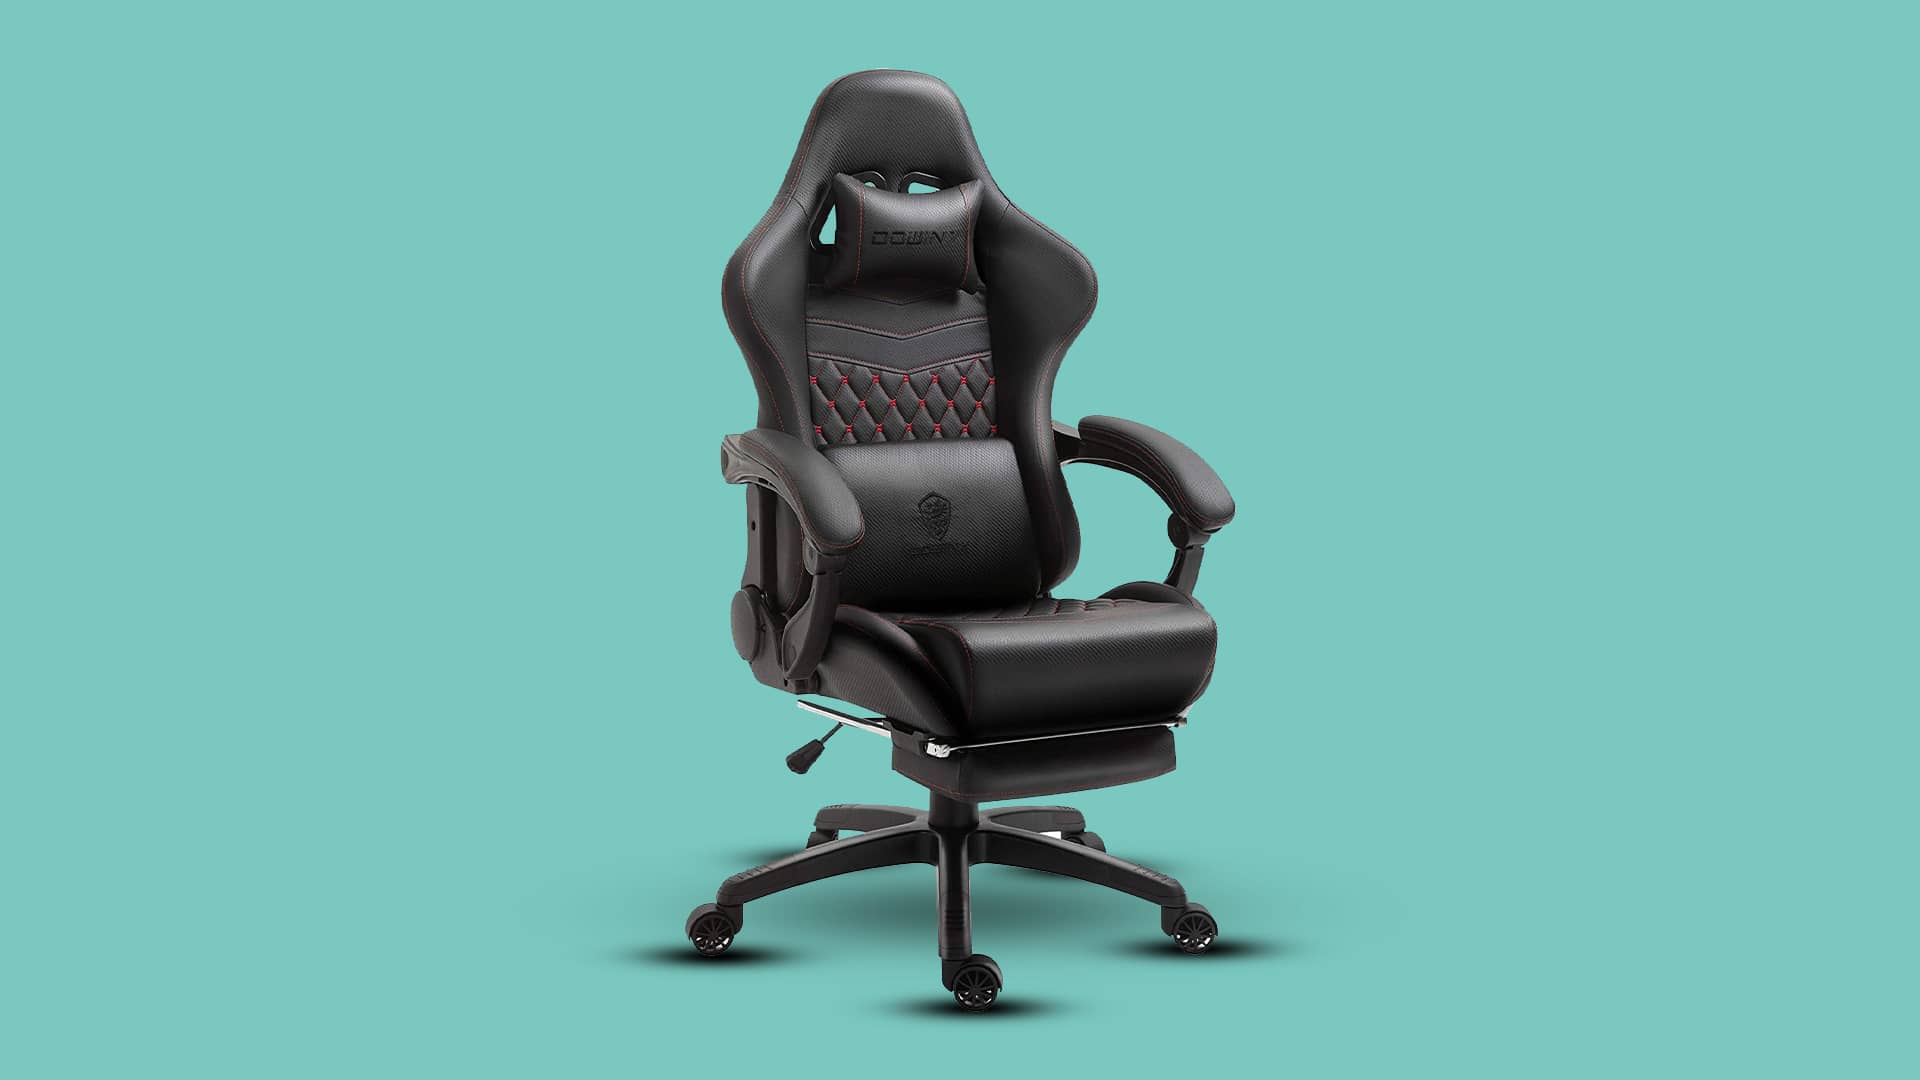 Dowinx Gaming Chair Office Chair PC Chair